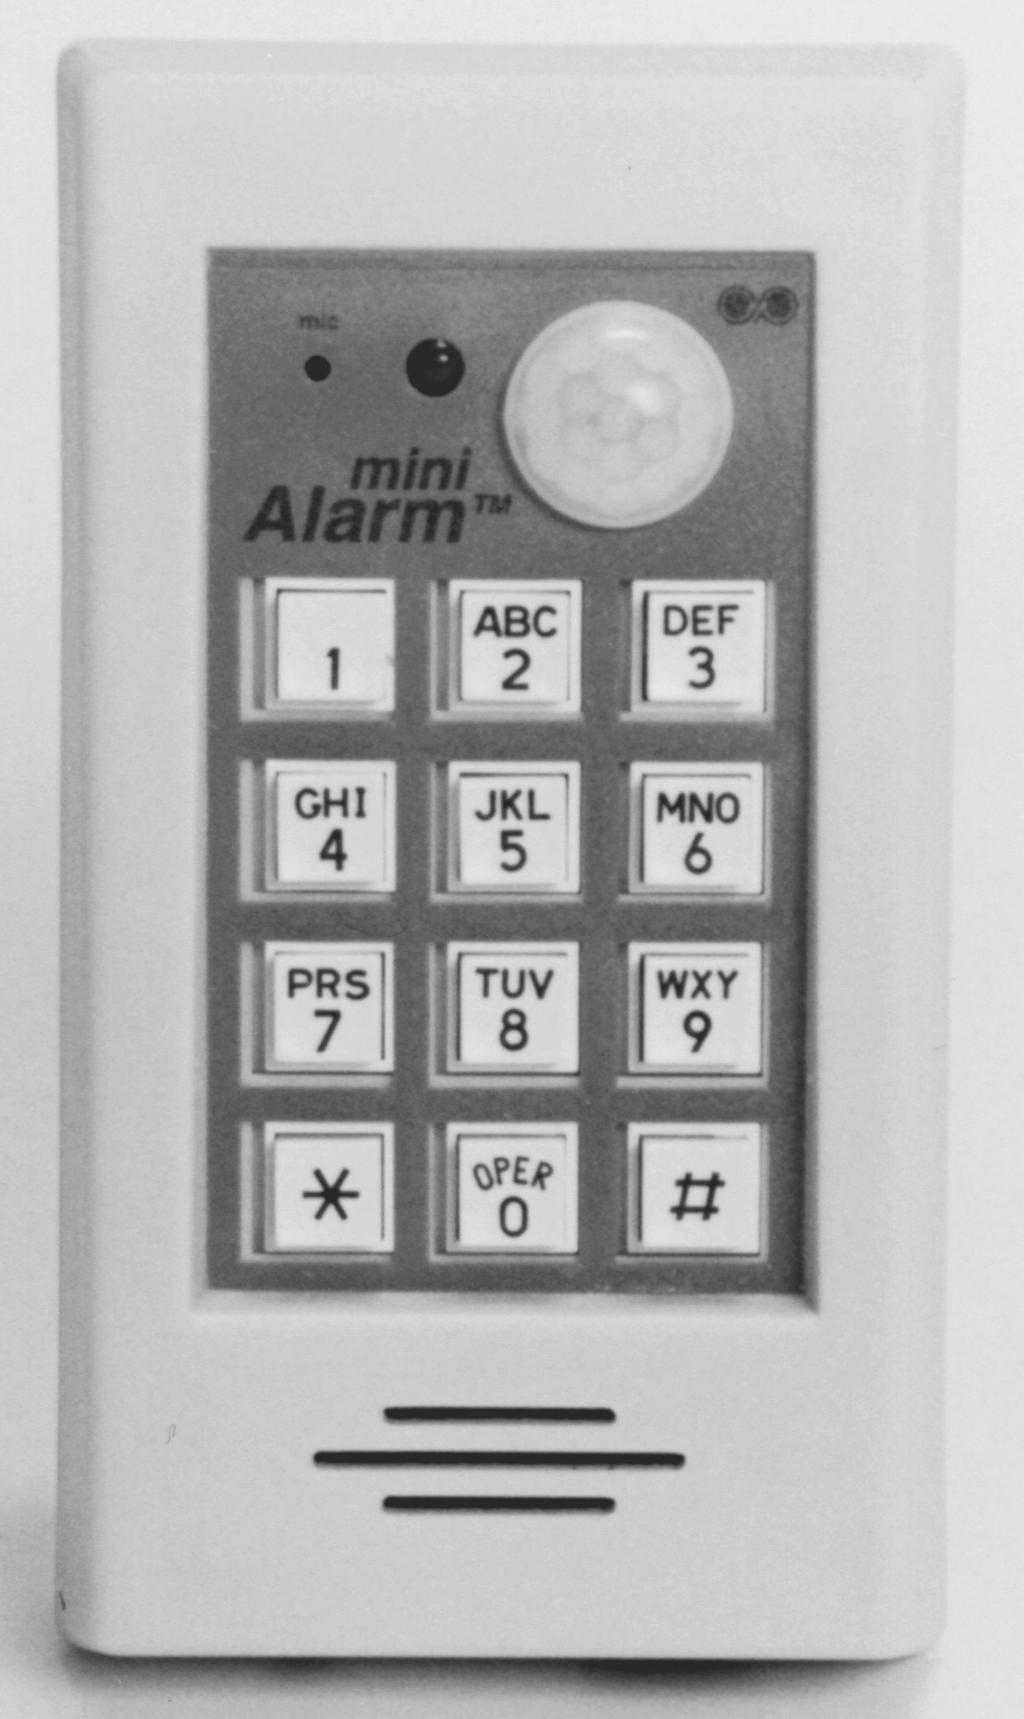 INSTRUCTIONS CONTROL PRODUCTS Innovative Technologies in Custom Electronic Design & Manufacturing Thank you for purchasing the minialarm Compact Security System.